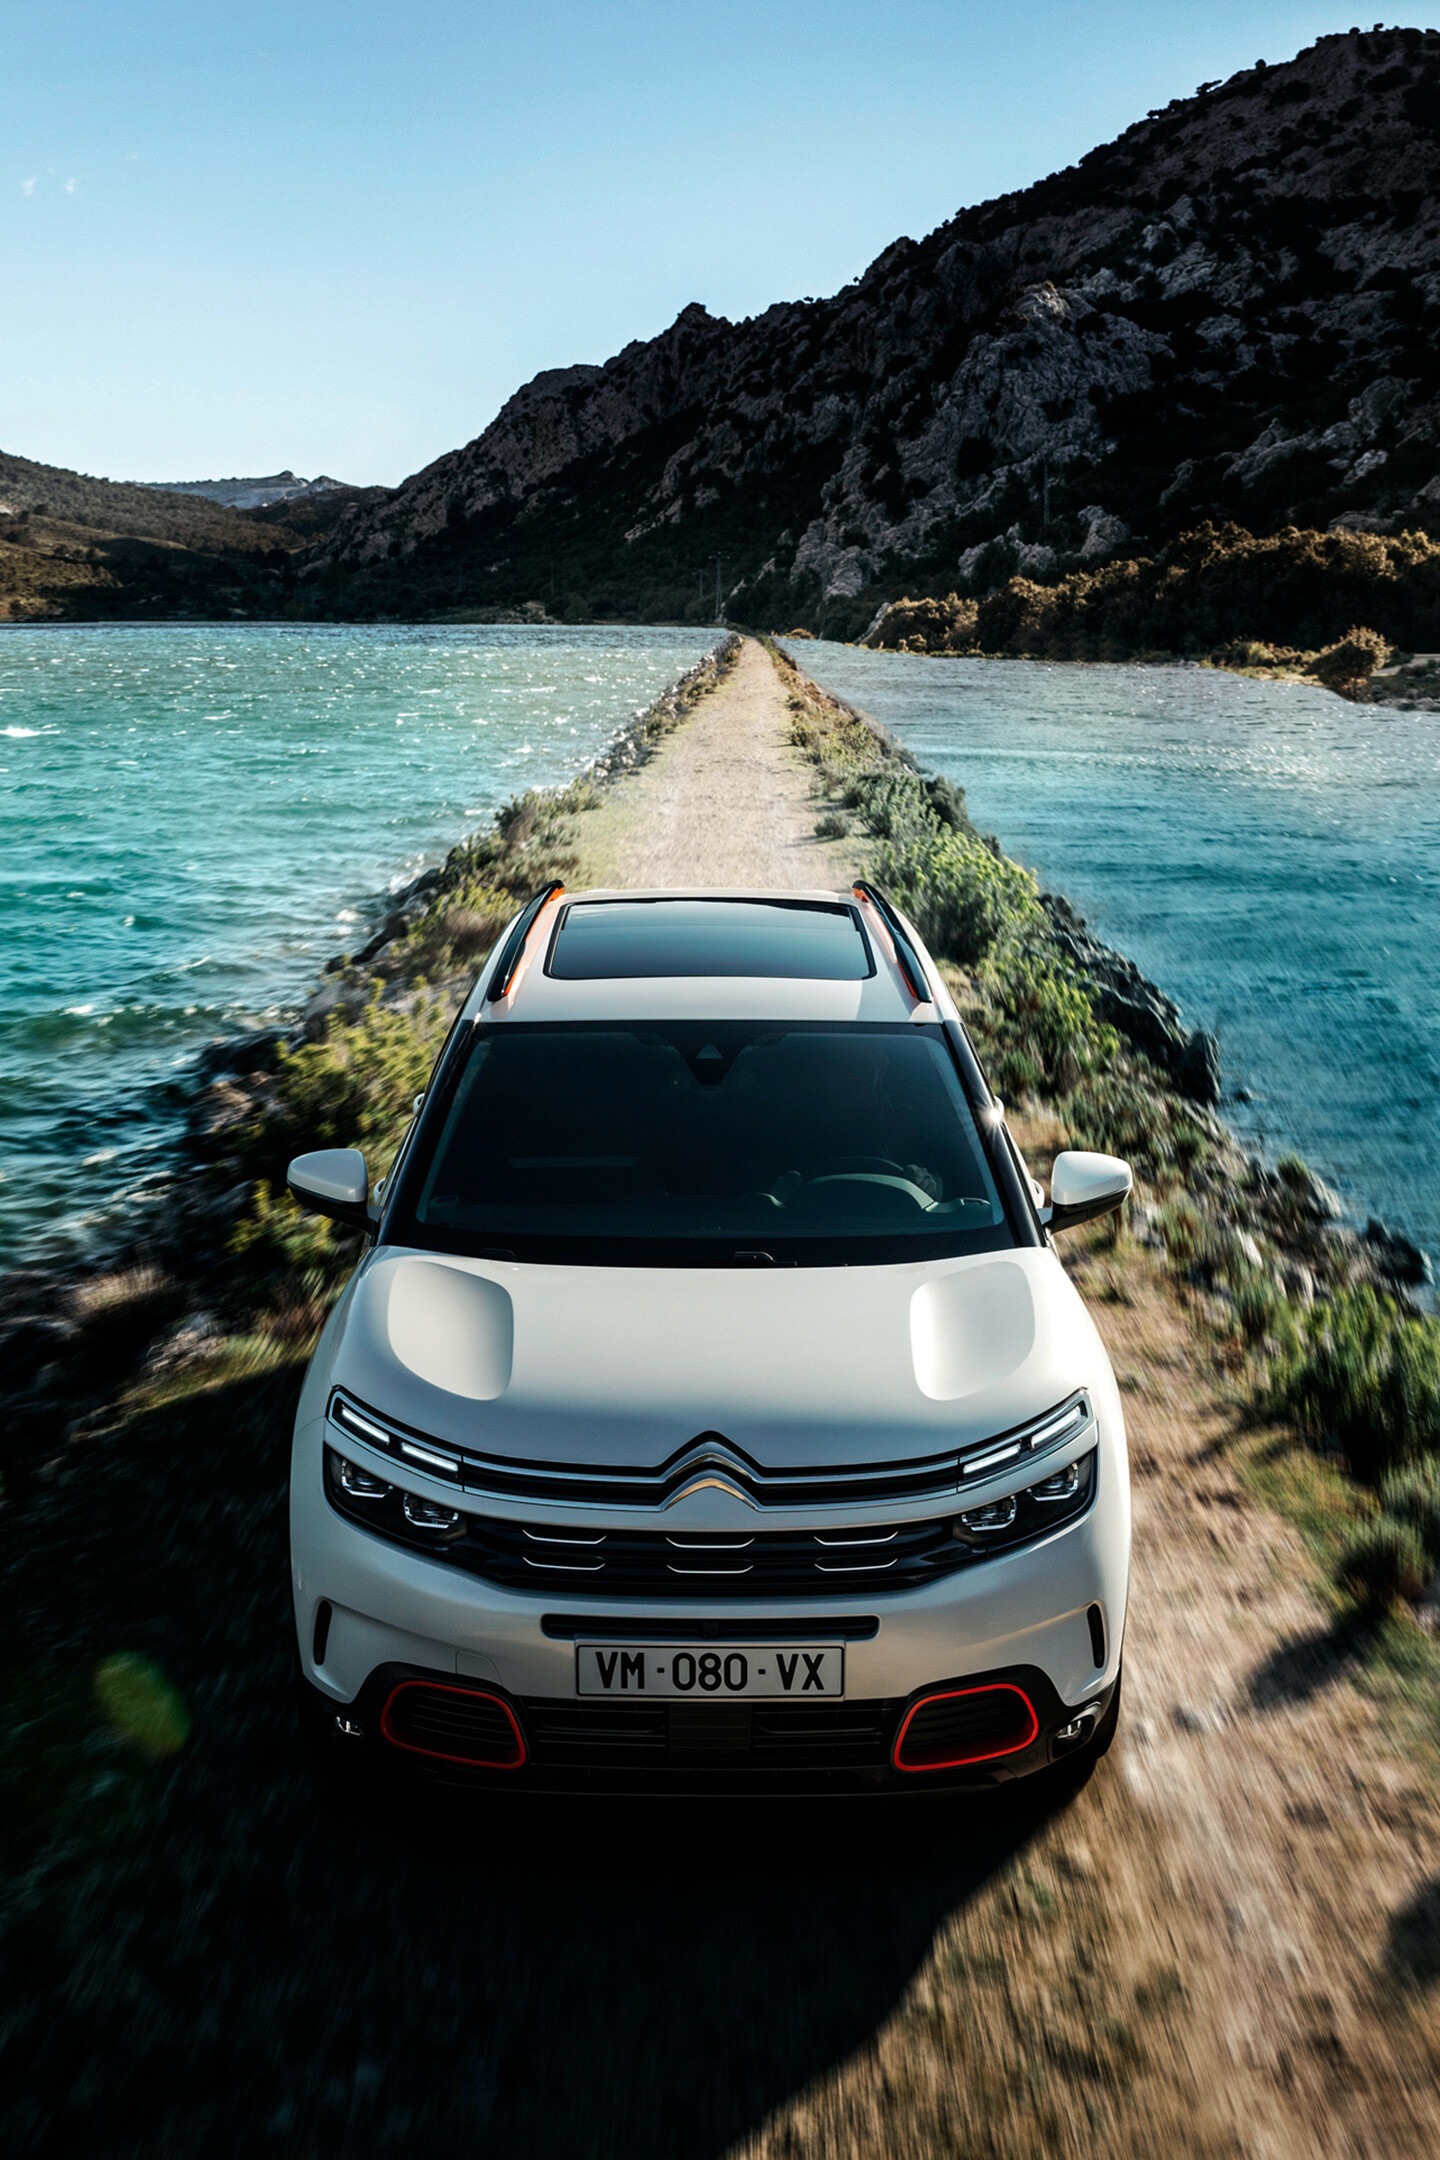 Citroen: Model C5 Aircross, 2018 SUV, Outdoor, The French car manufacturer. 1440x2160 HD Wallpaper.